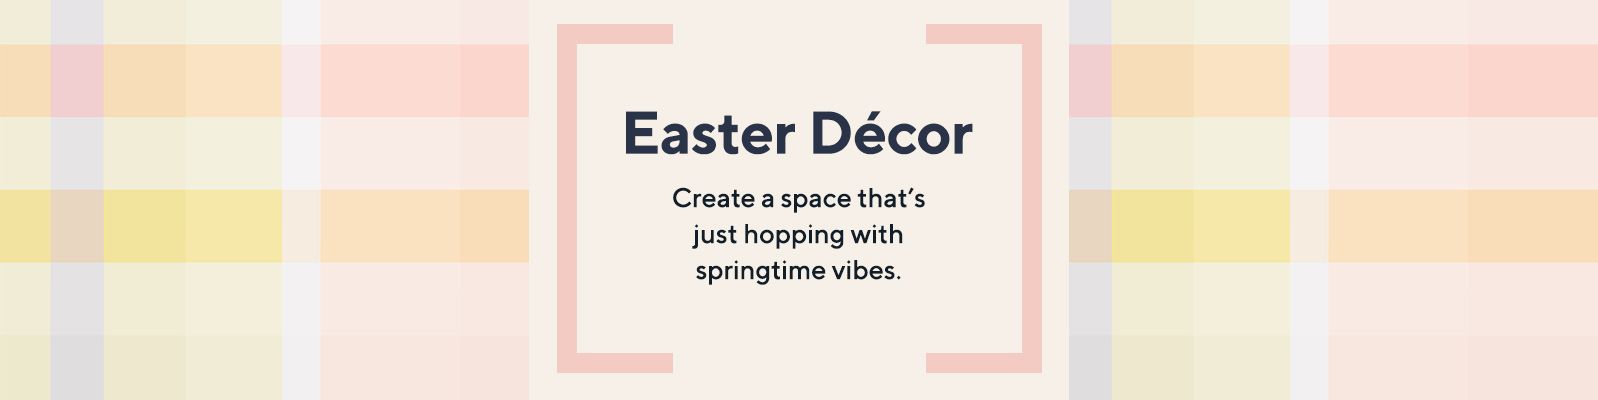 Easter Décor  Create a space that's just hopping with springtime vibes. 